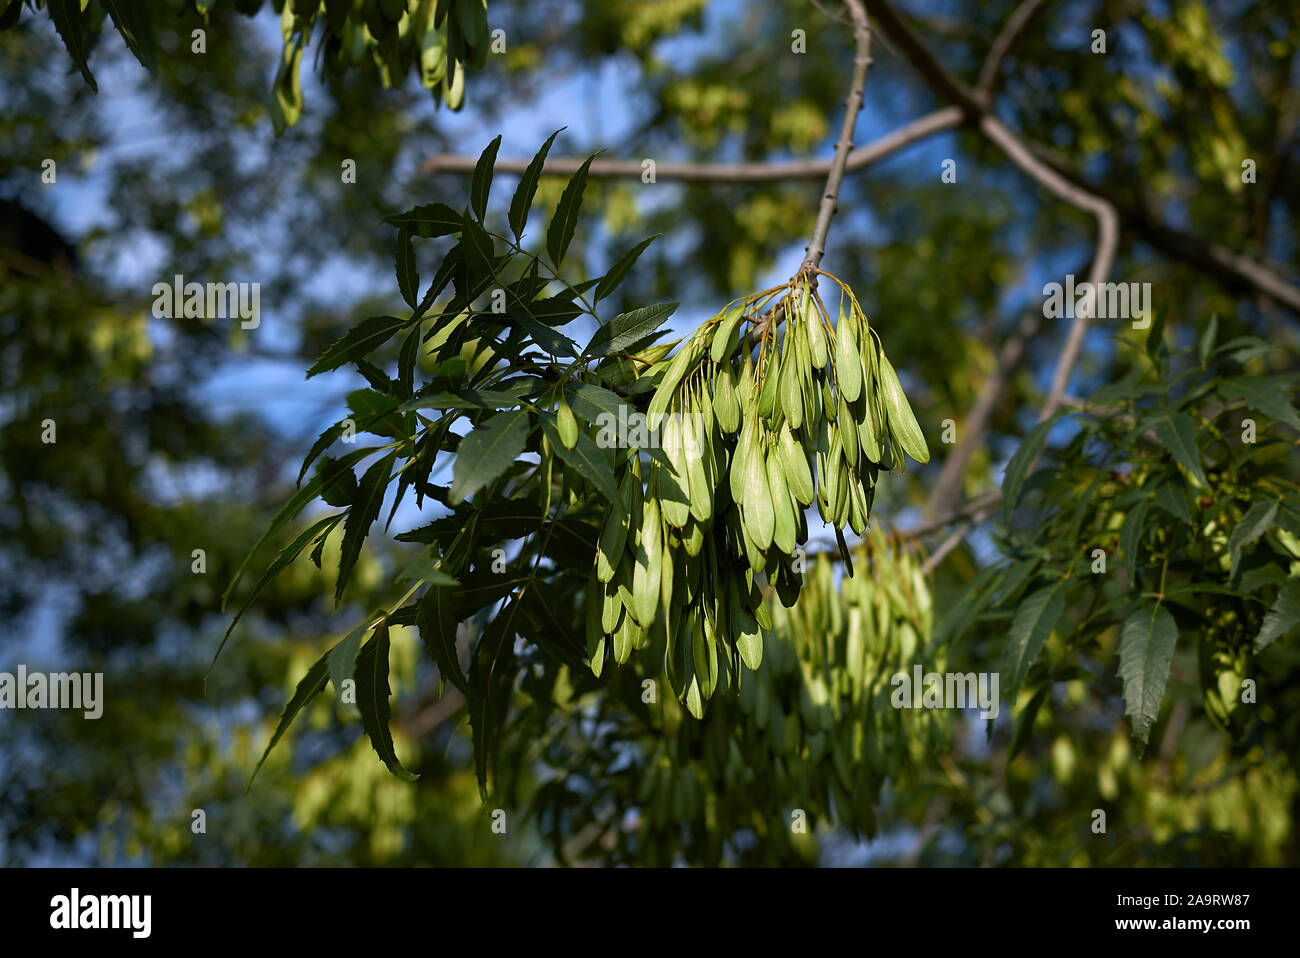 Fraxinus excelsior tree Stock Photo